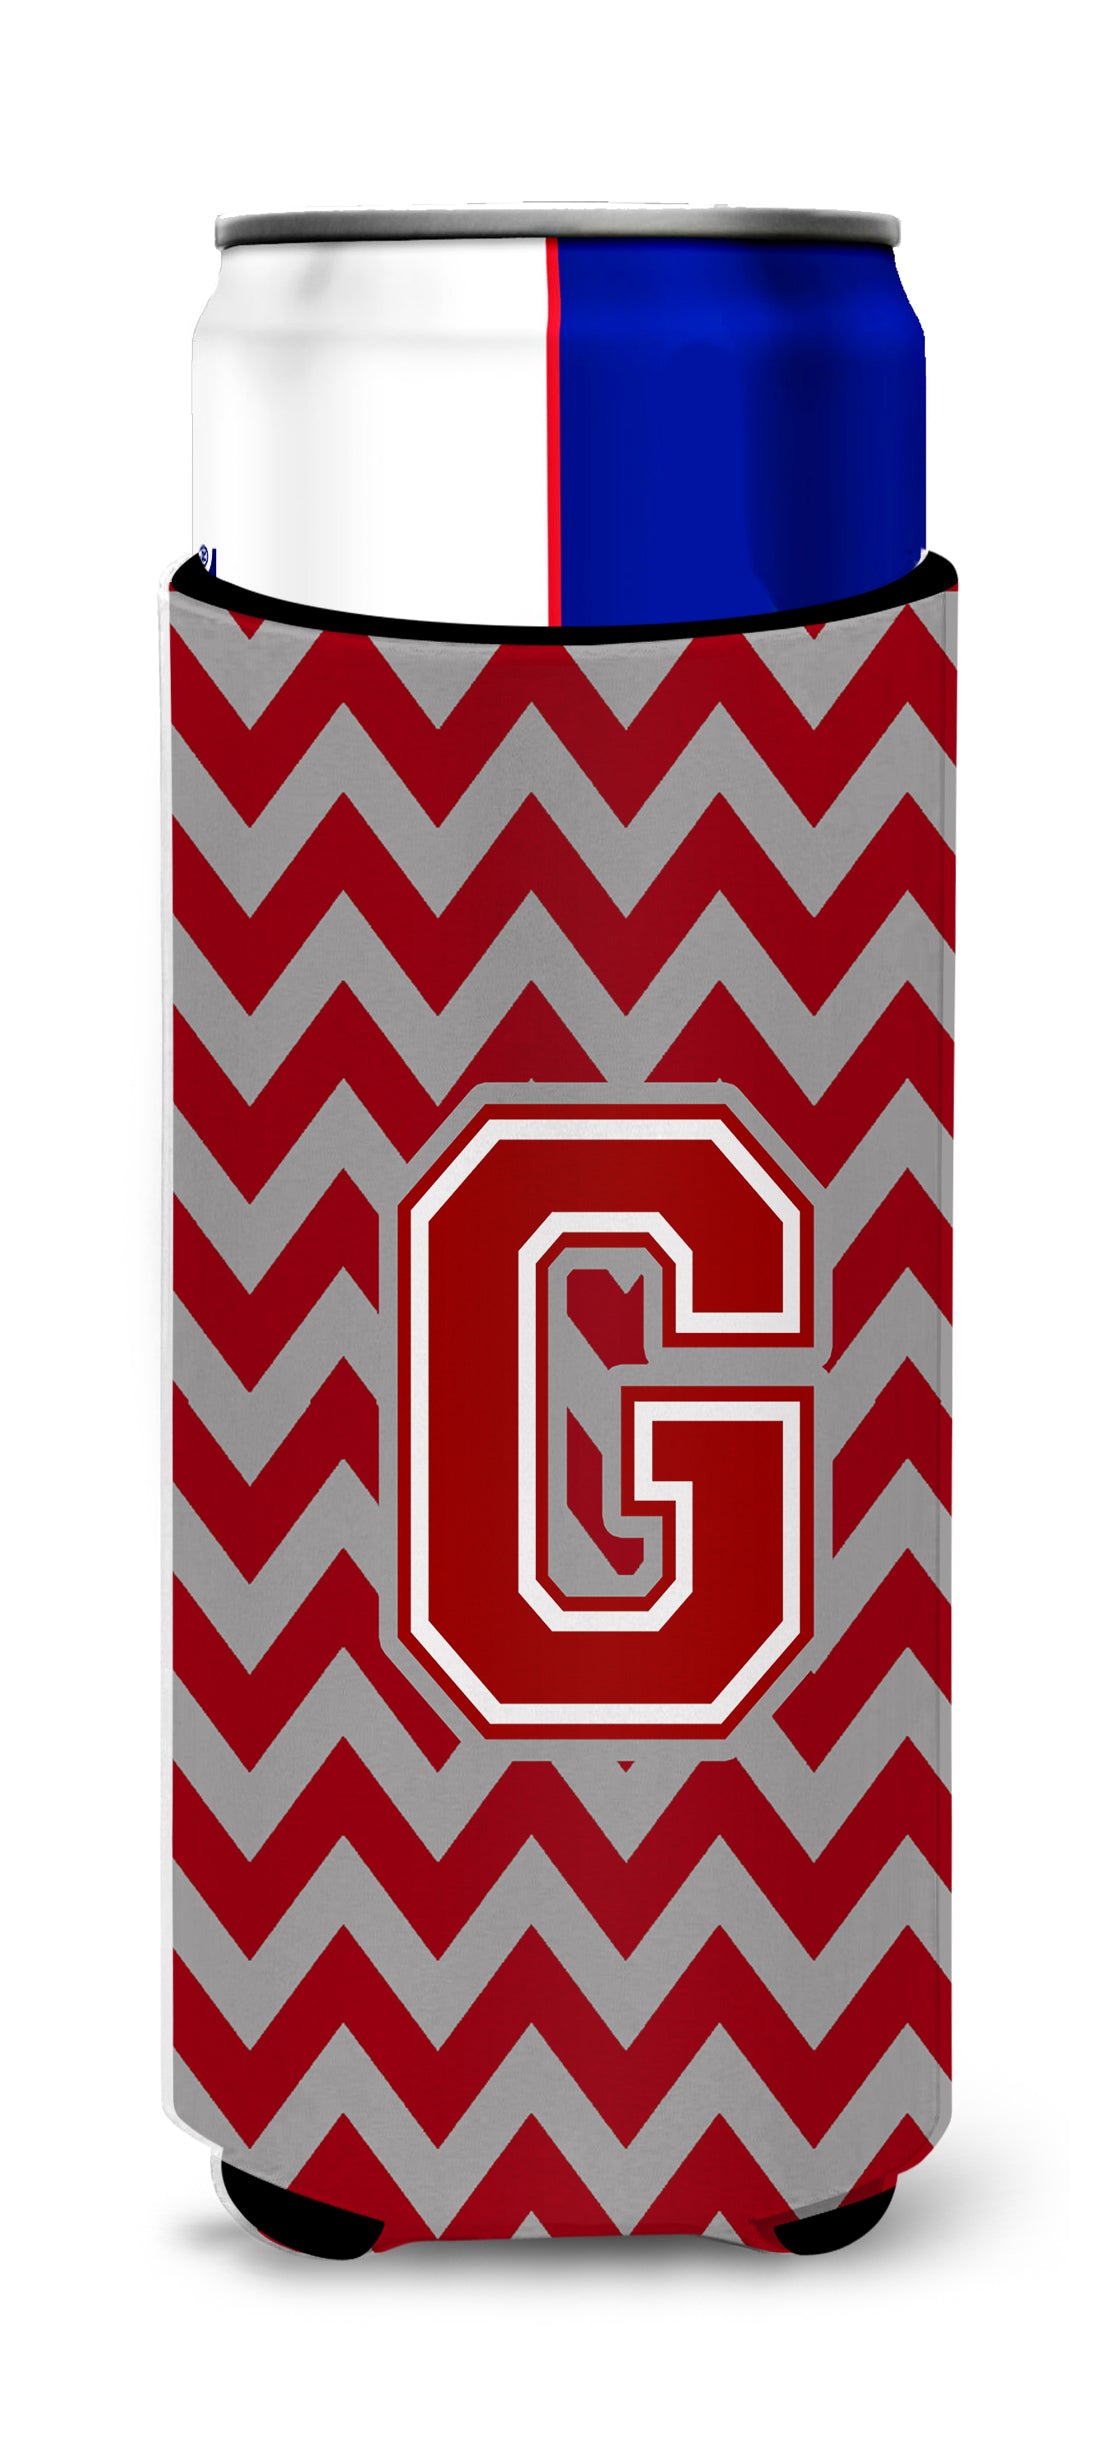 Letter G Chevron Maroon and White Ultra Beverage Insulators for slim cans CJ1049-GMUK